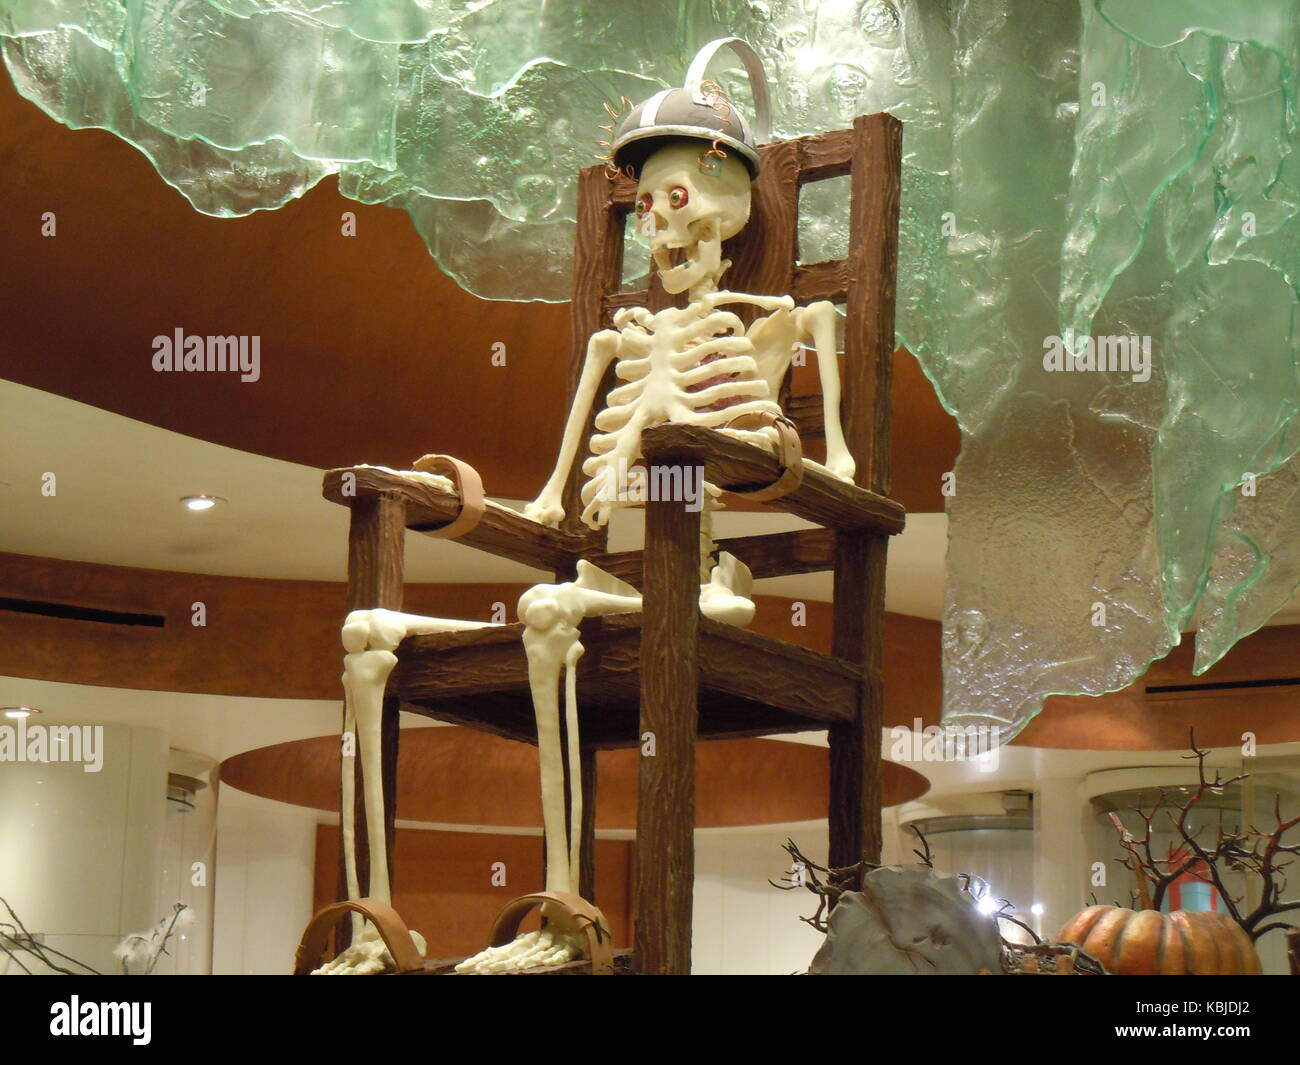 A skeleton sitting in an electric chair Stock Photo